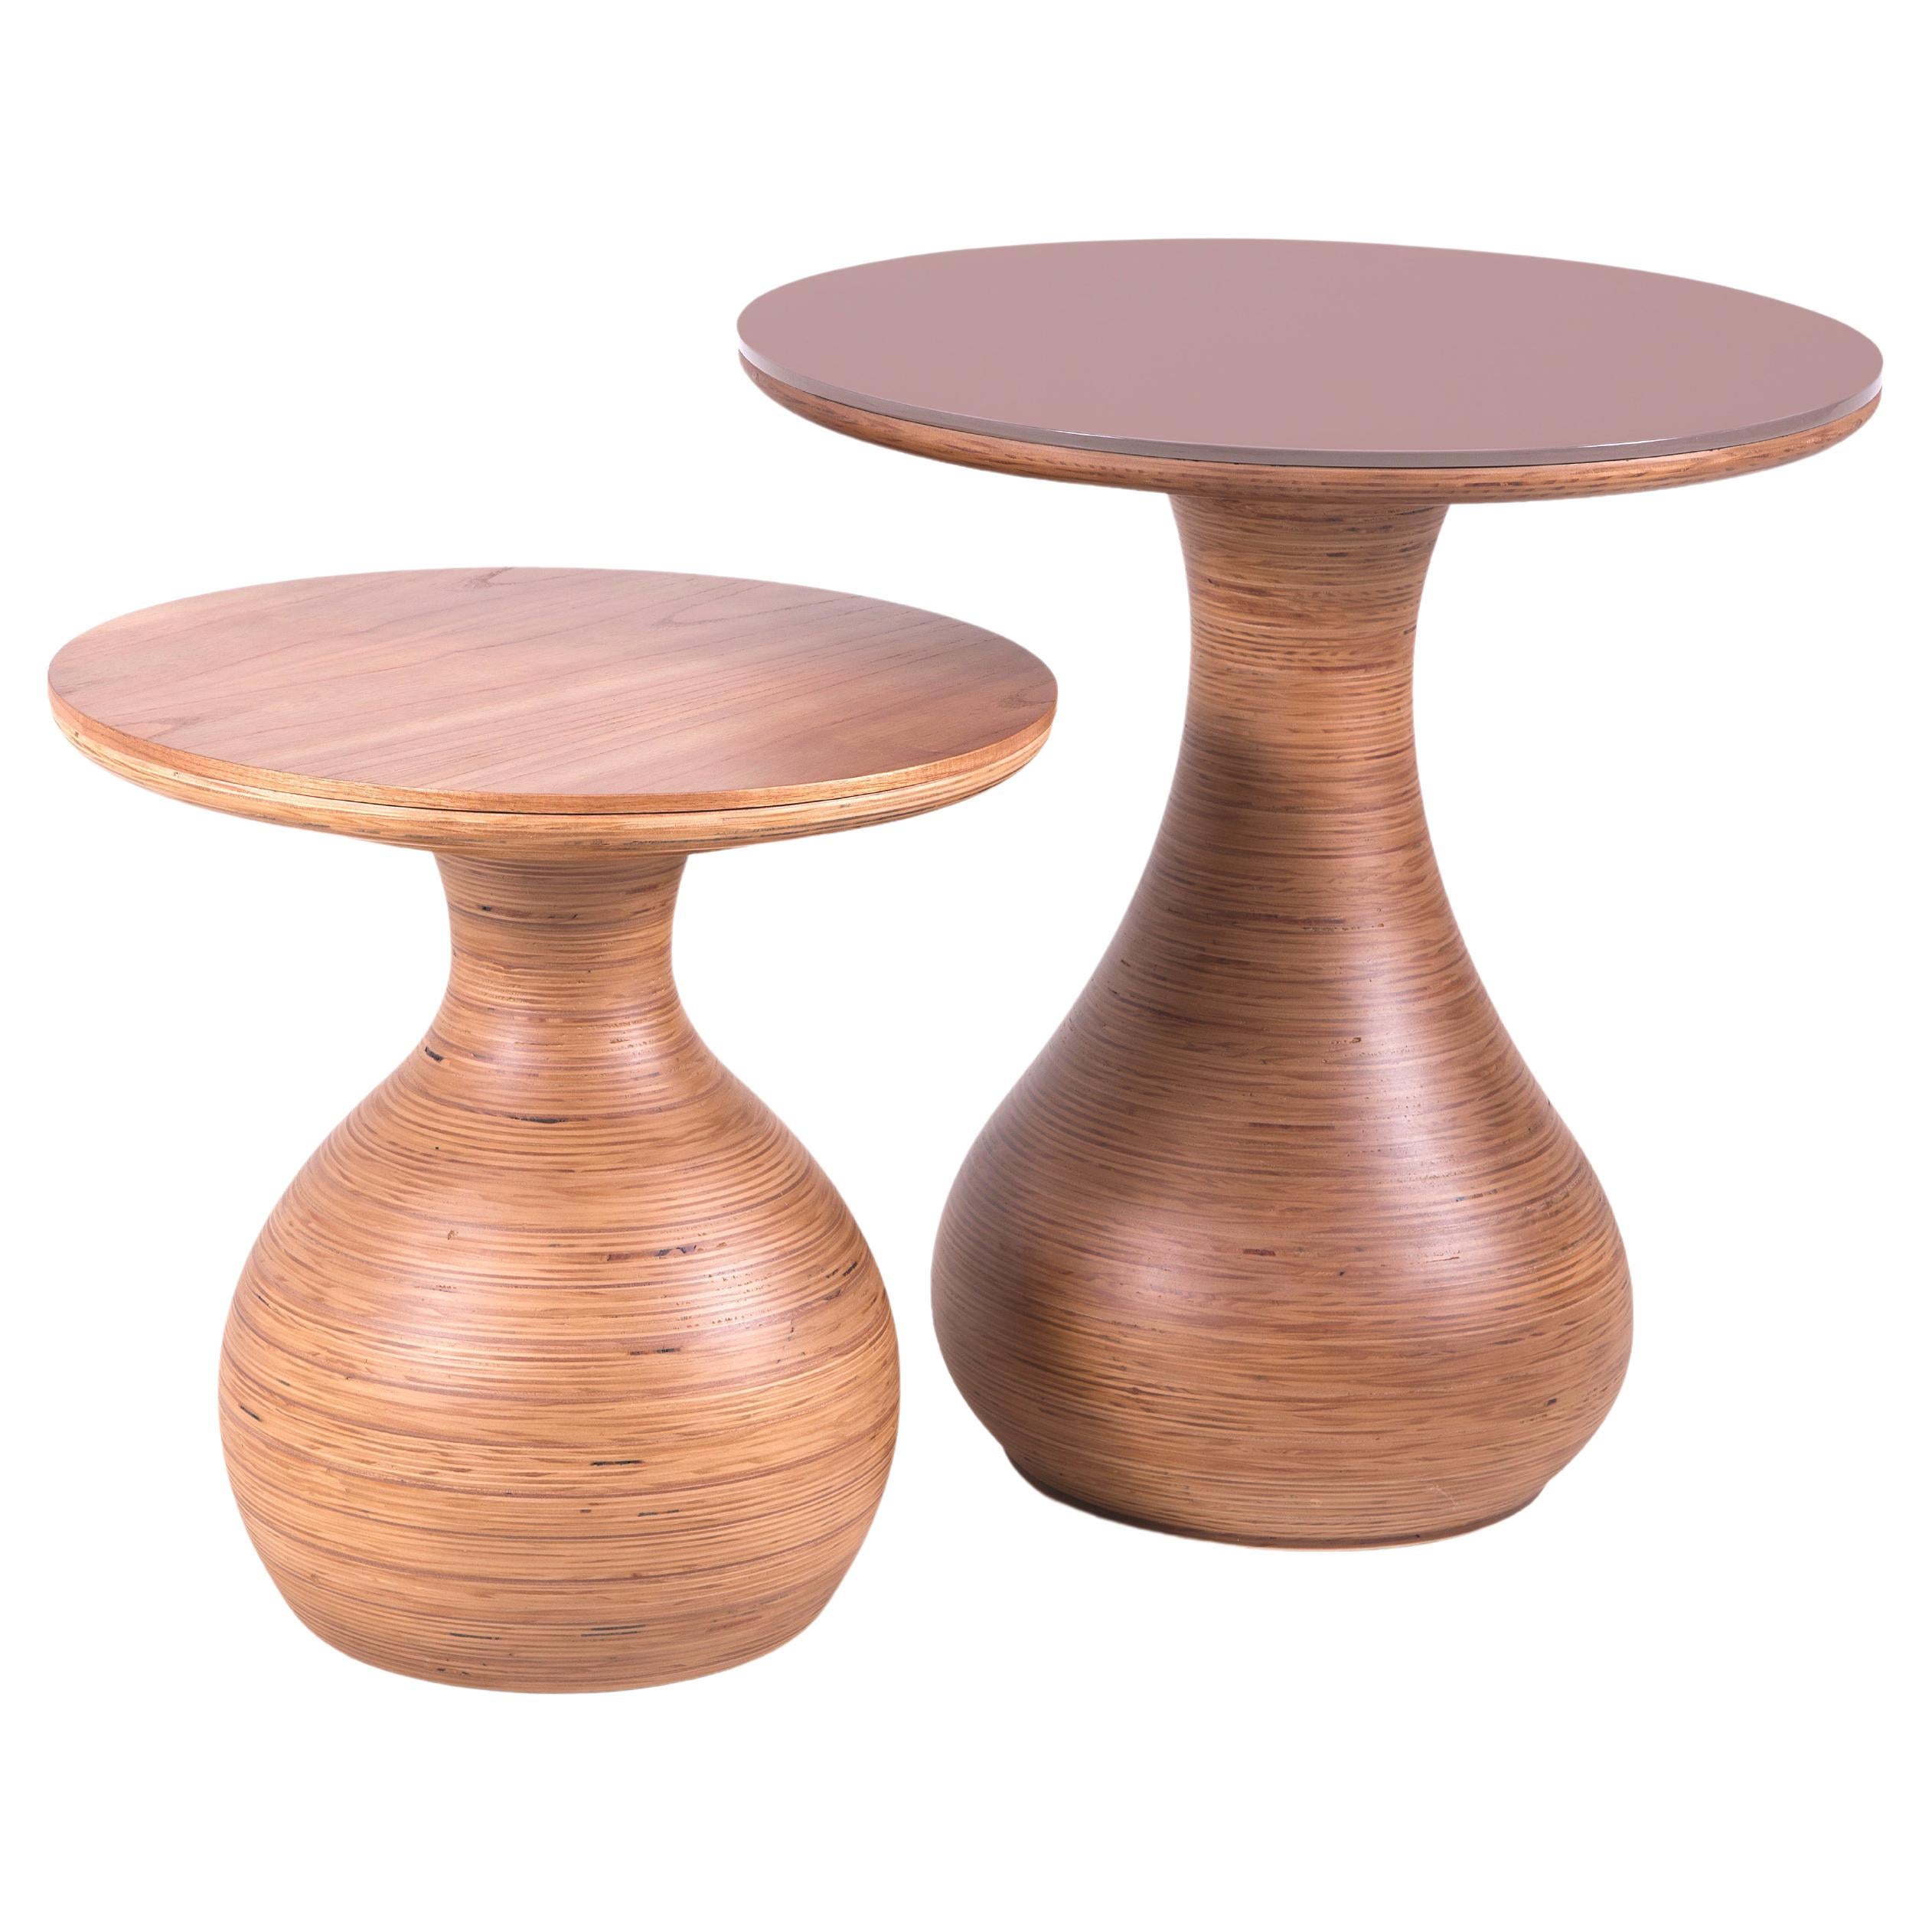 Amber Stain Wood Aville Side Table Set For Sale